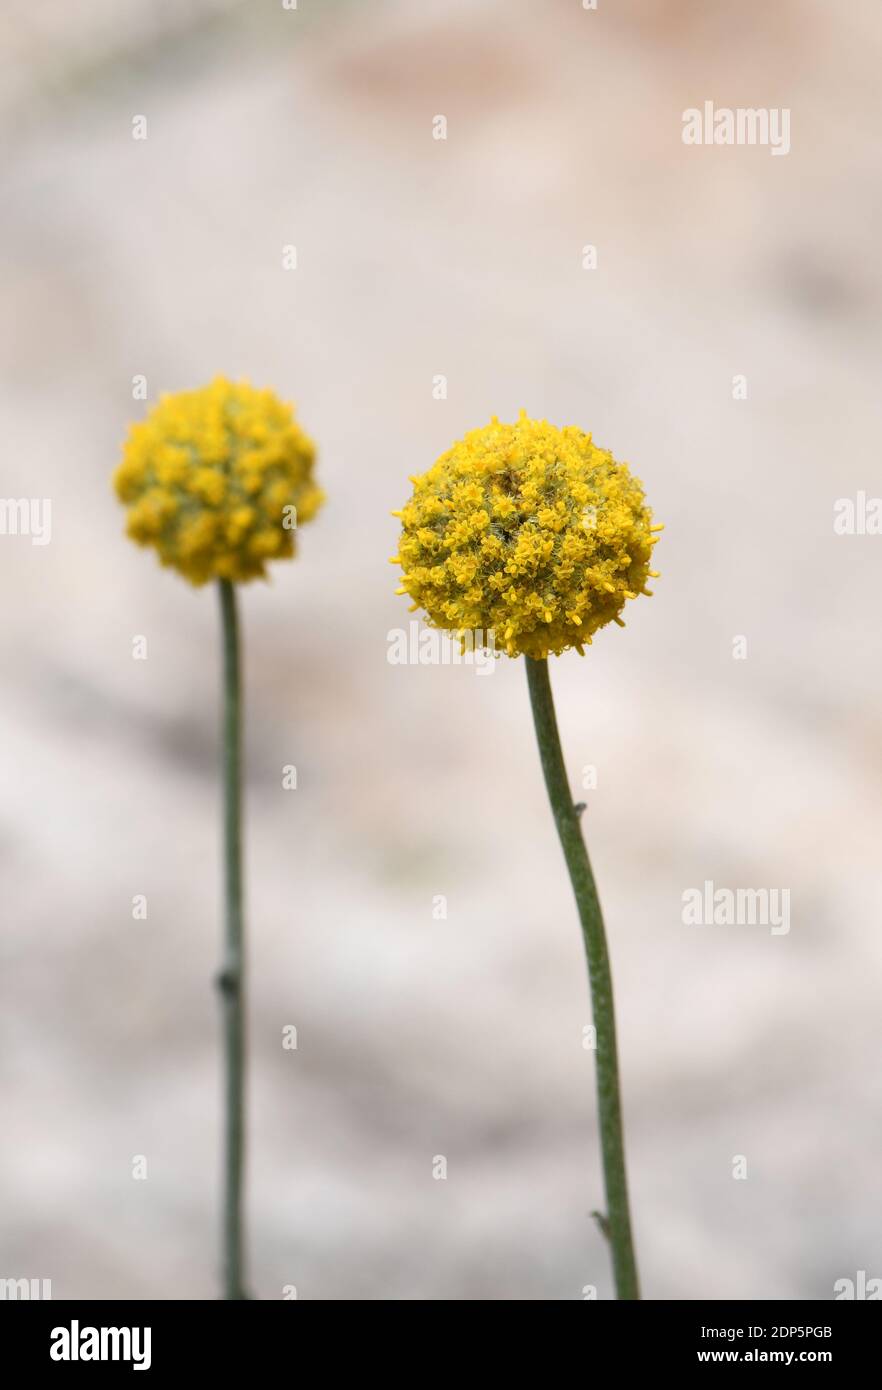 Australian native Yellow Billy Button flowers, Craspedia glauca, daisy family Asteraceae. Also known as woollyheads or drumstick flowers. Perennial Stock Photo